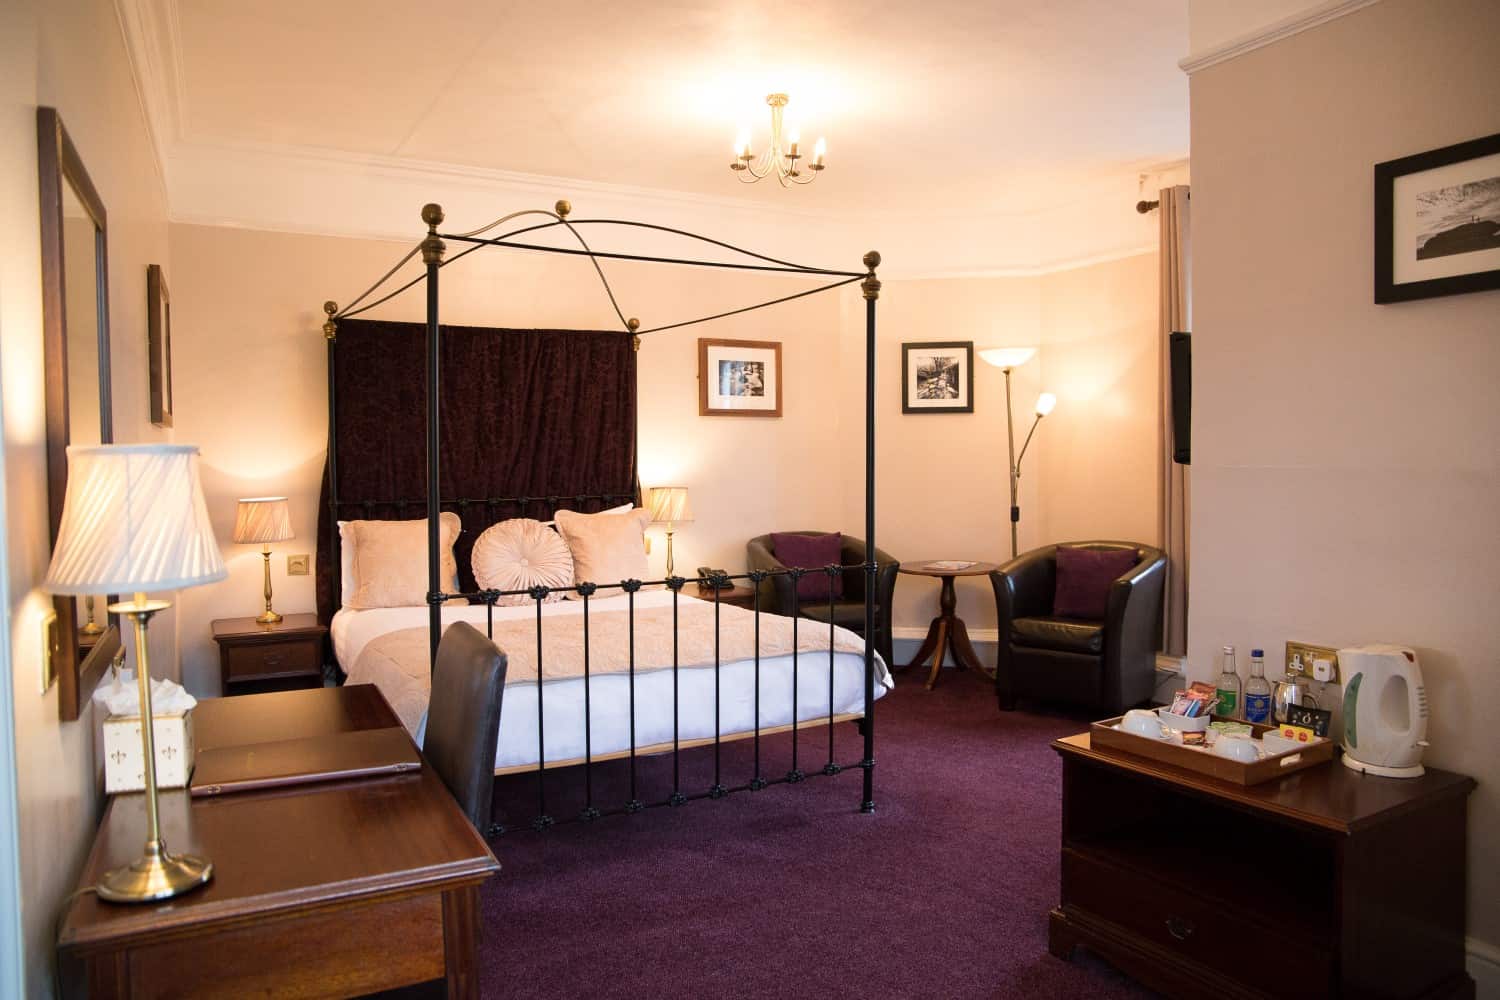 Deluxe Double room at The Bedford Hotel Tavistock